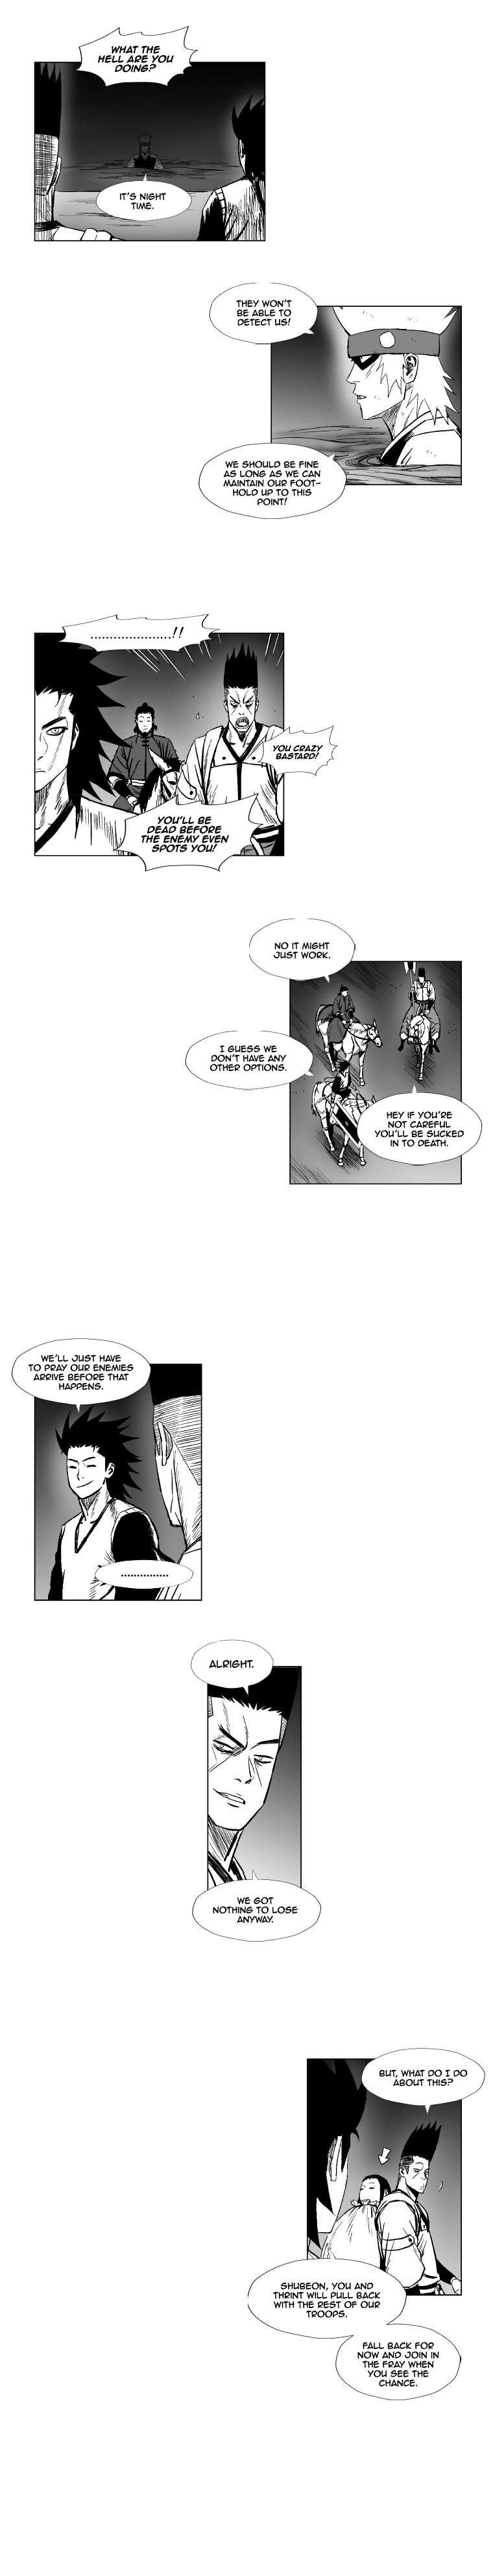 Red Storm Chapter 137 page 6